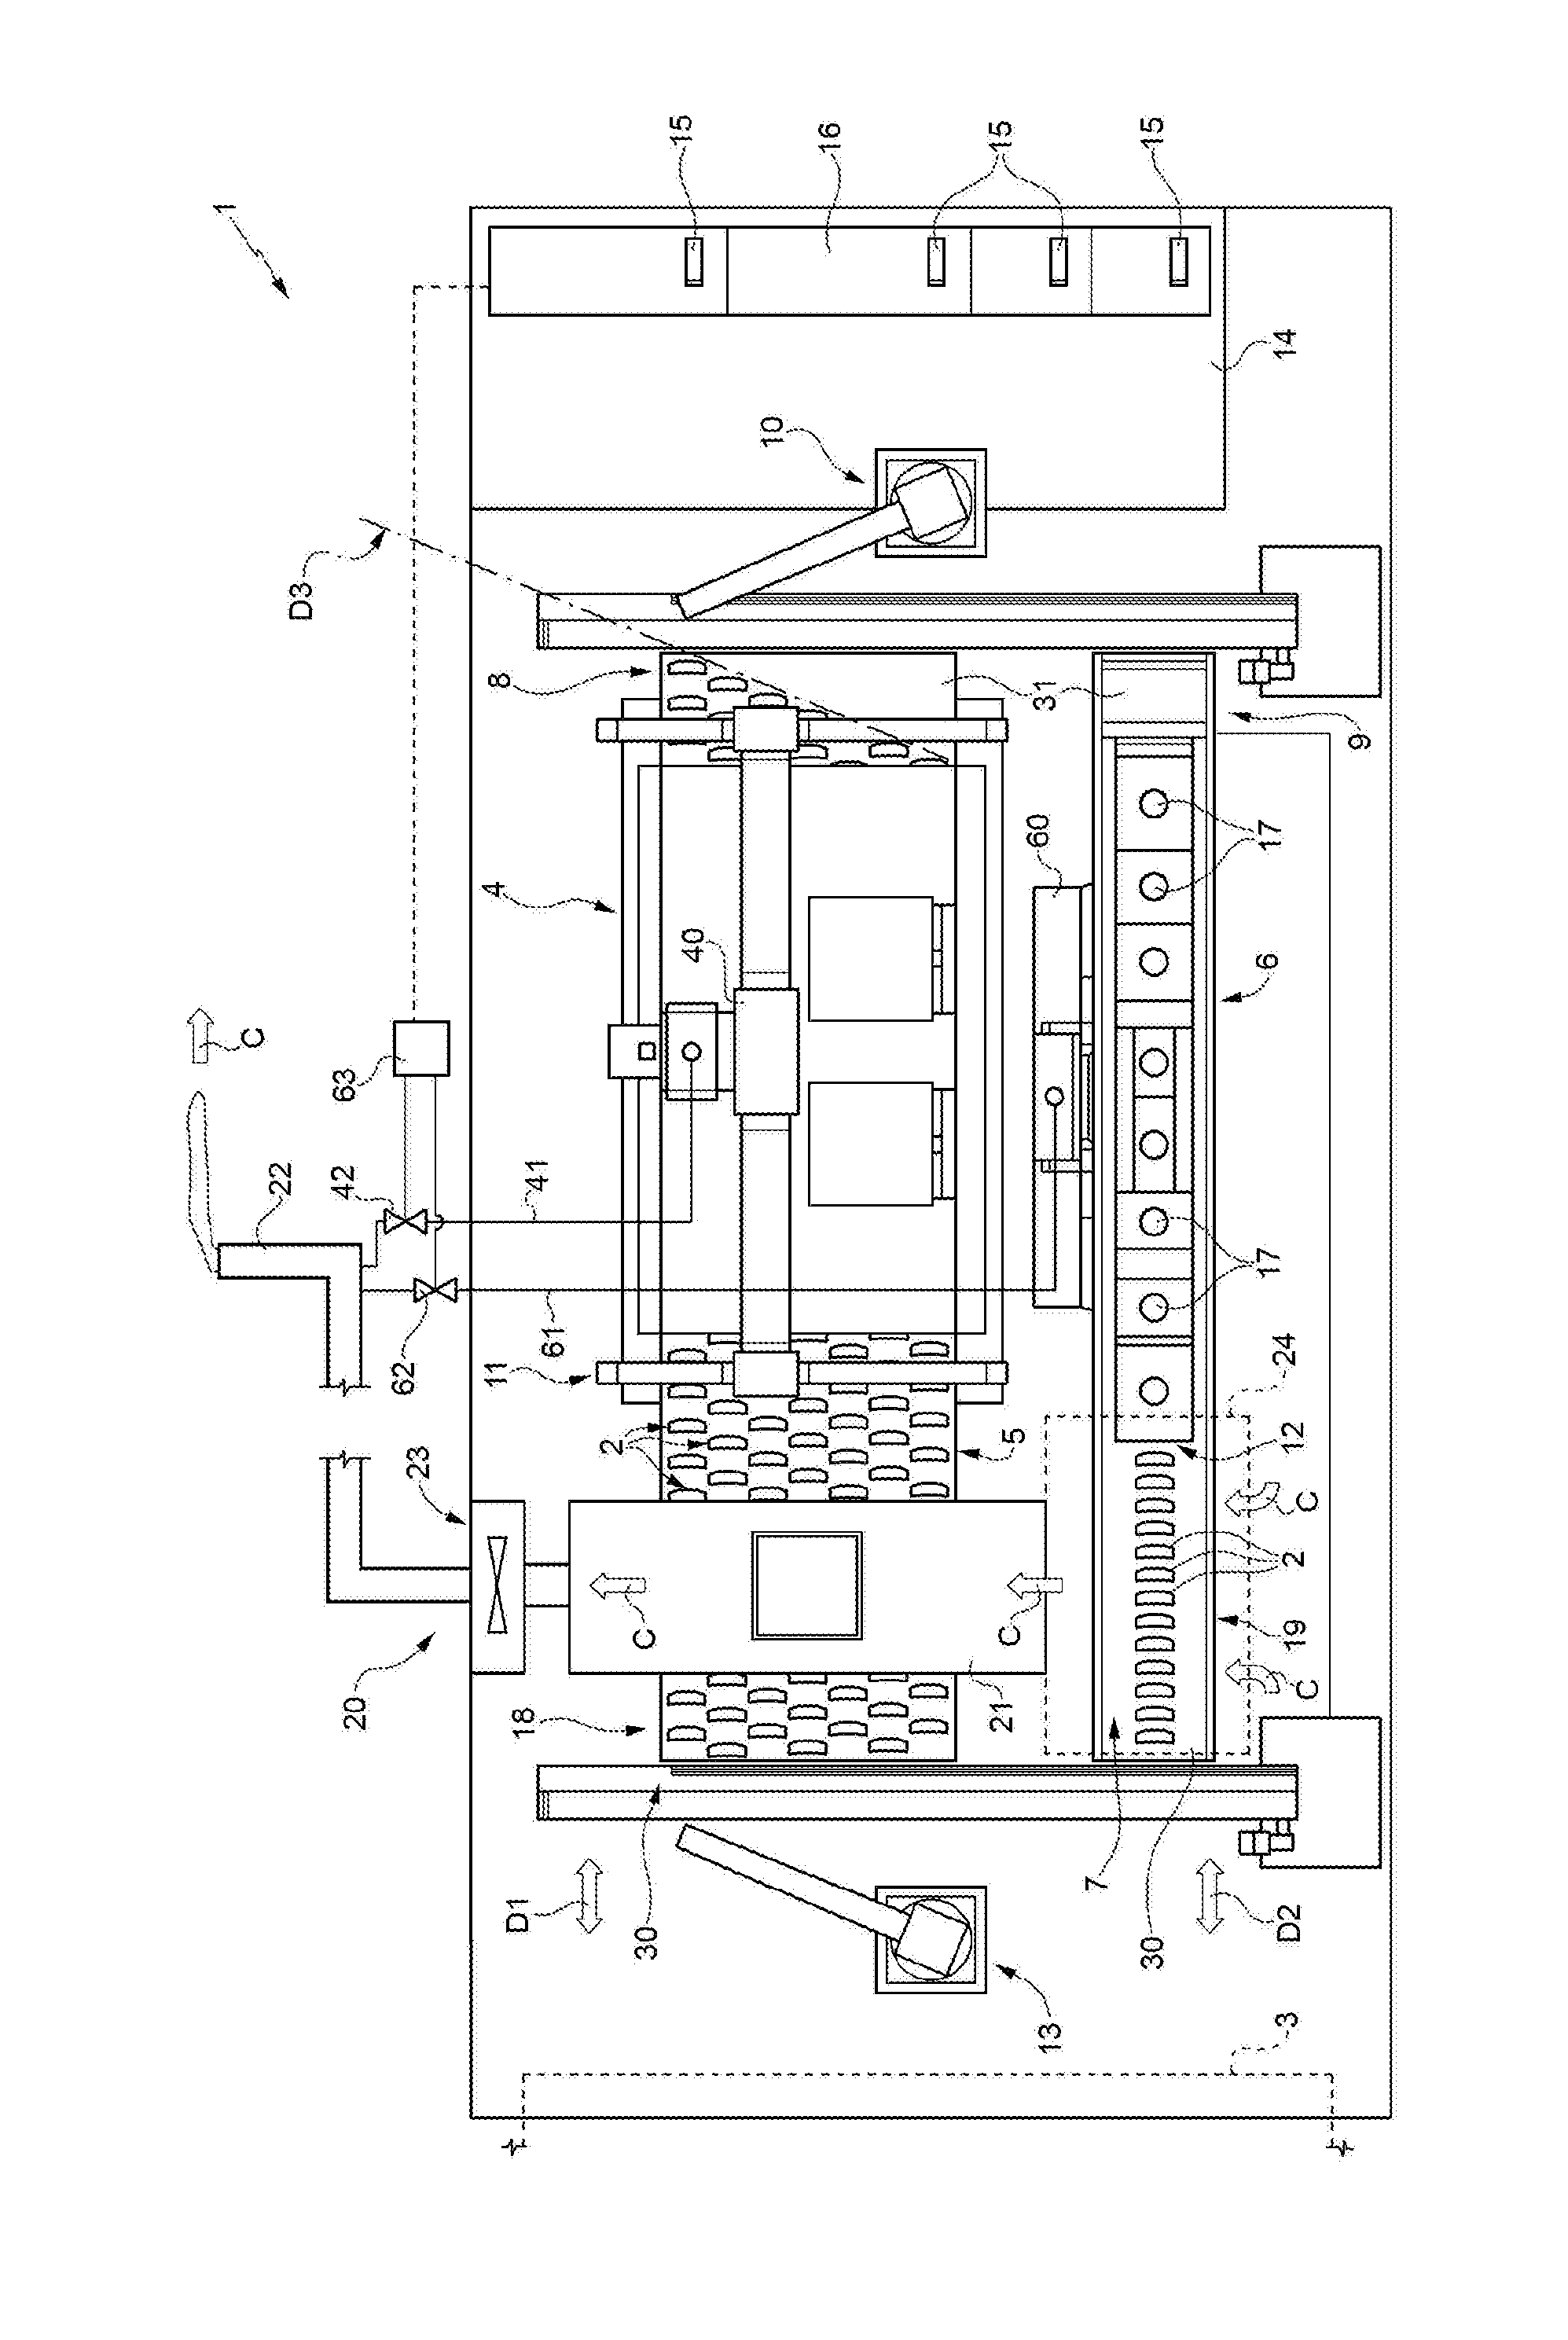 A method and plant for carrying out thermal treatments of braking elements, in particular brake pads